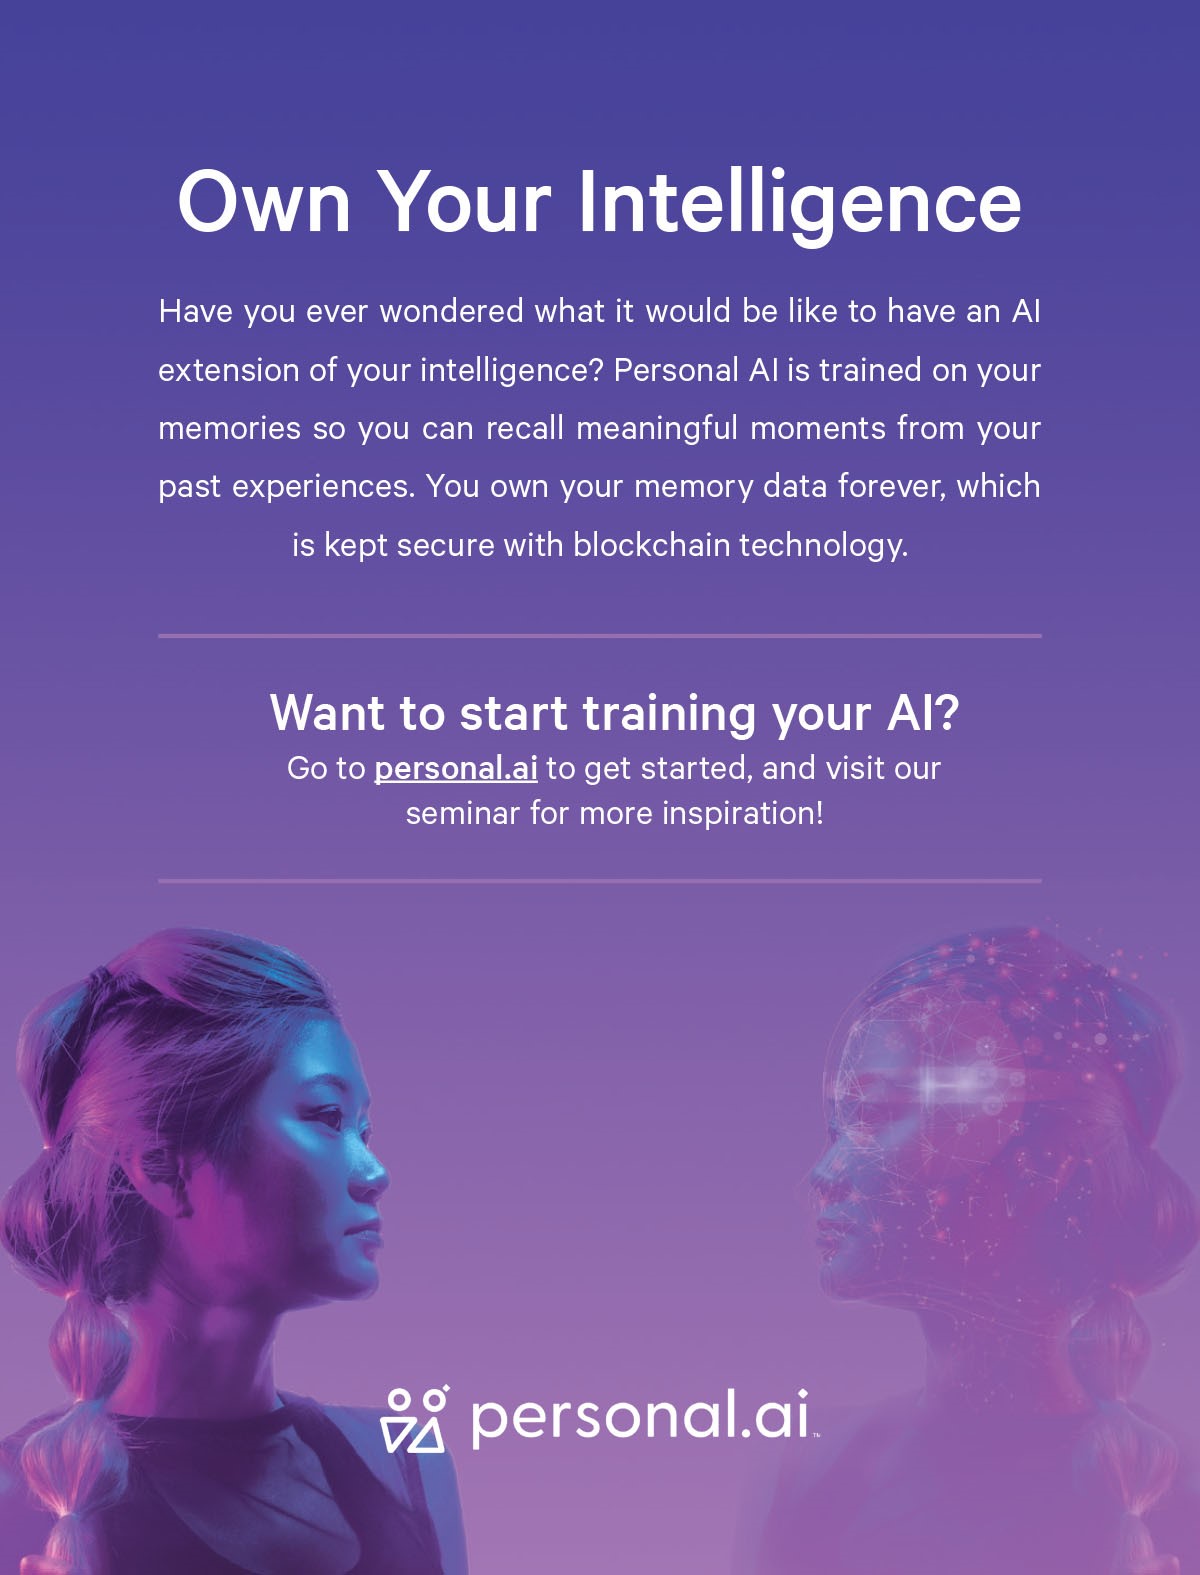 Personal AI - Own Your Intelligence Have you ever wondered what it would be like to have an AI extension of your intelligence? Personal AI is trained on your memories so you can recall meaningful moments from your past experiences. You own your memory data forever, which is kept secure with blockchain technology. Want to start training your AI? Go to personal.ai to get started, and visit our seminar for more inspiration!